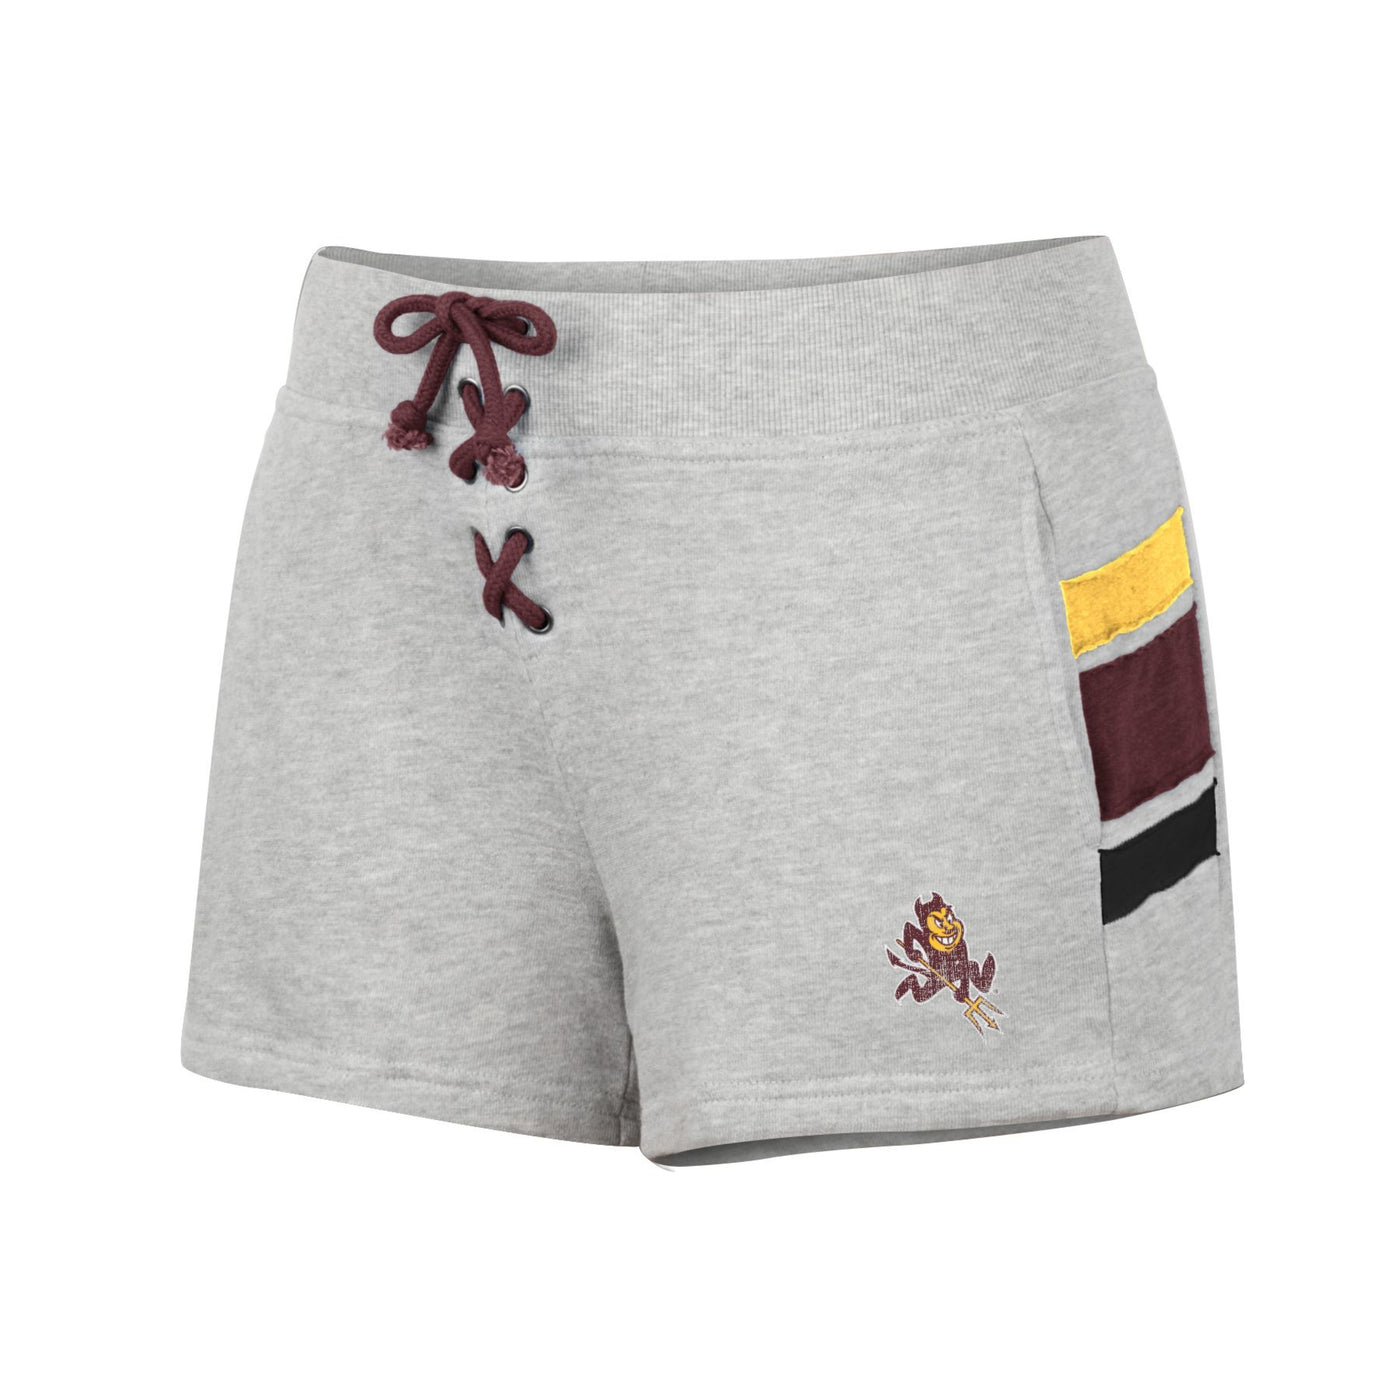 ASU gray shorts with a Sparky on the leg, 3 color blocks on the side, and a maroon lace up front